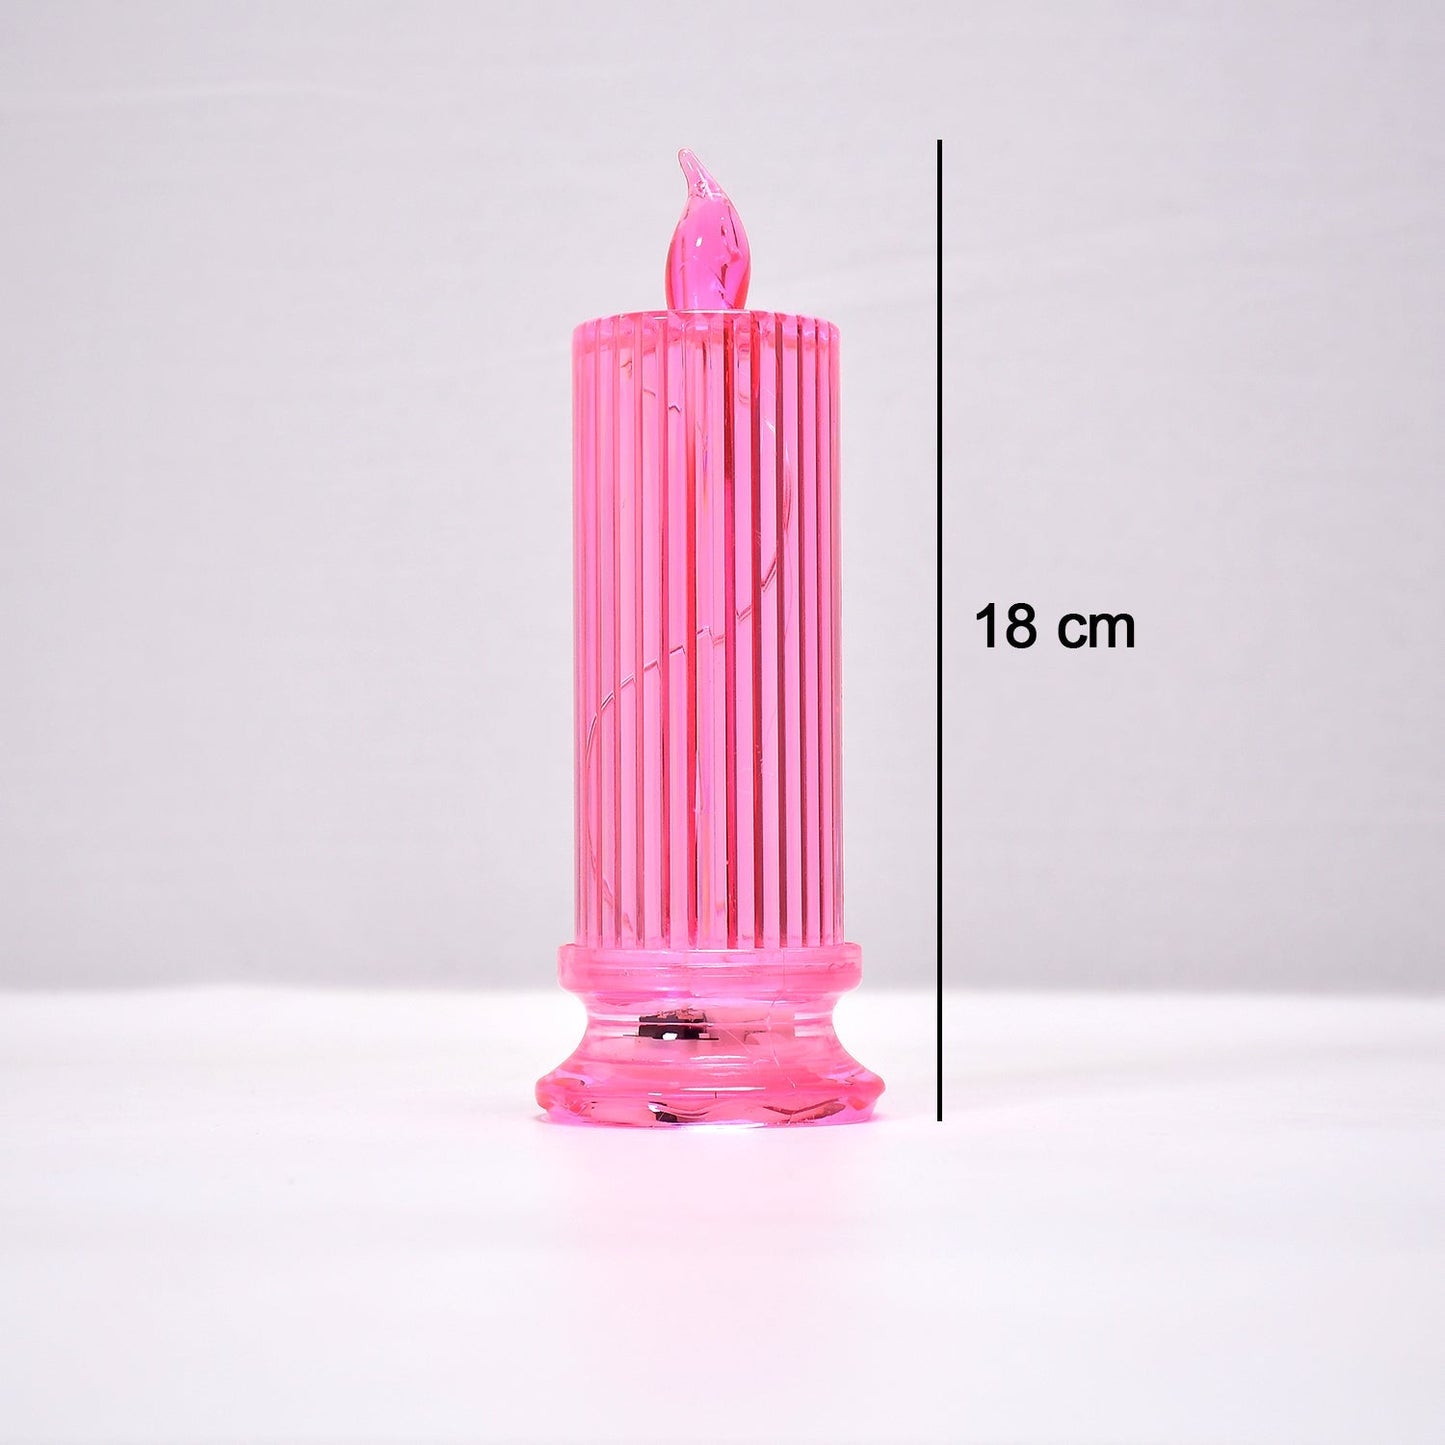 6244 Big Simple Candles for Home Decoration, Crystal Candle Lights (Multicolor) DeoDap